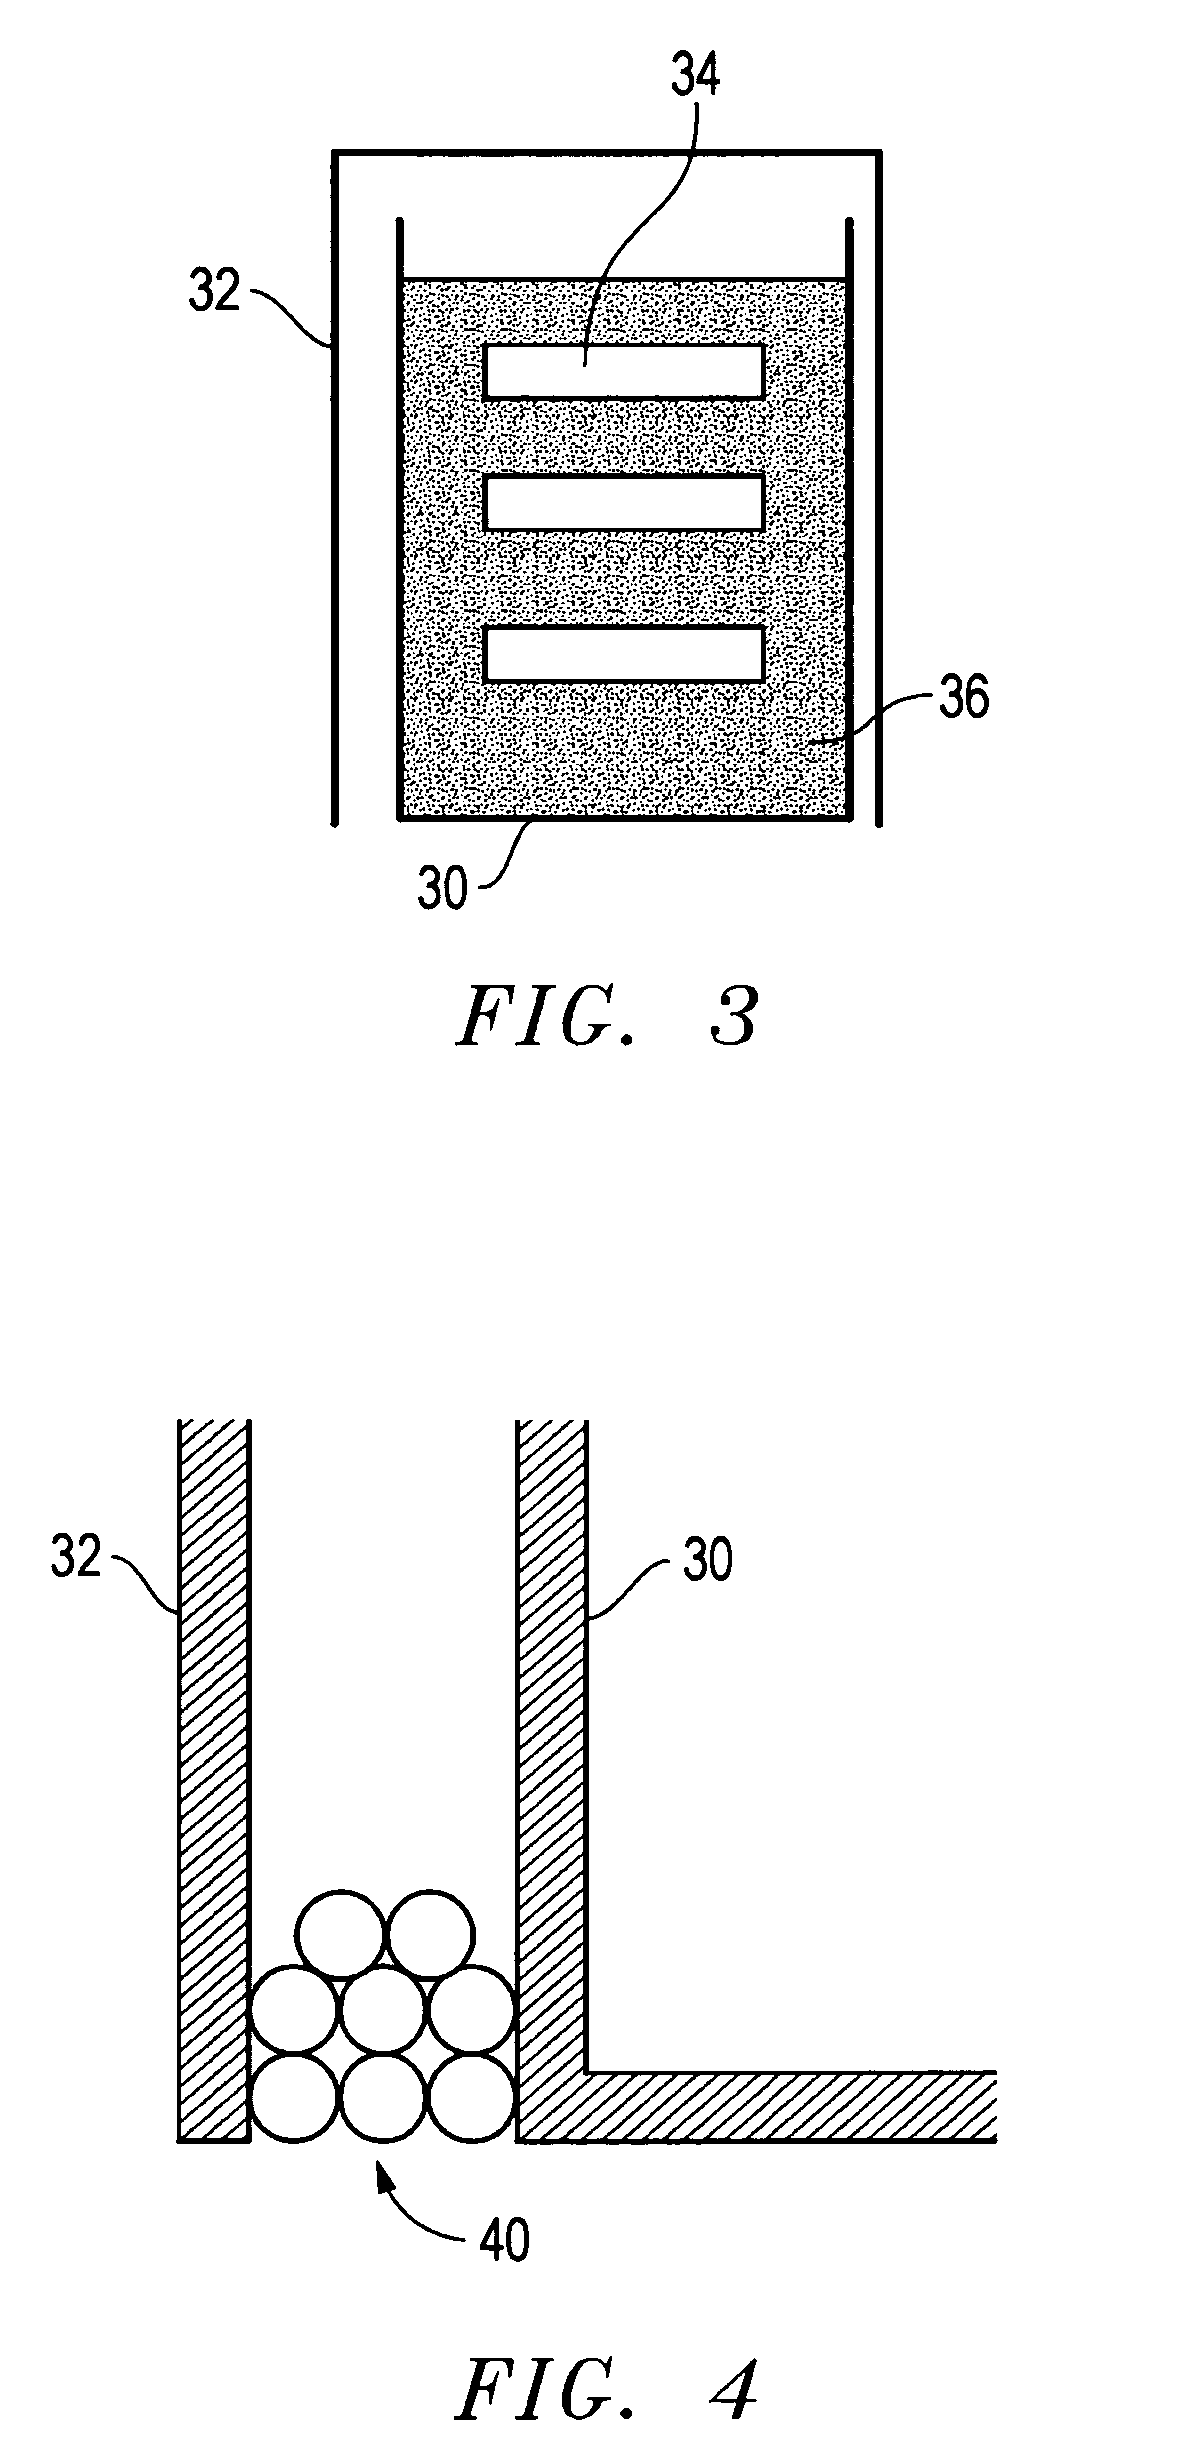 Zirconia toughened alumina ESD safe ceramic composition, component, and methods for making same